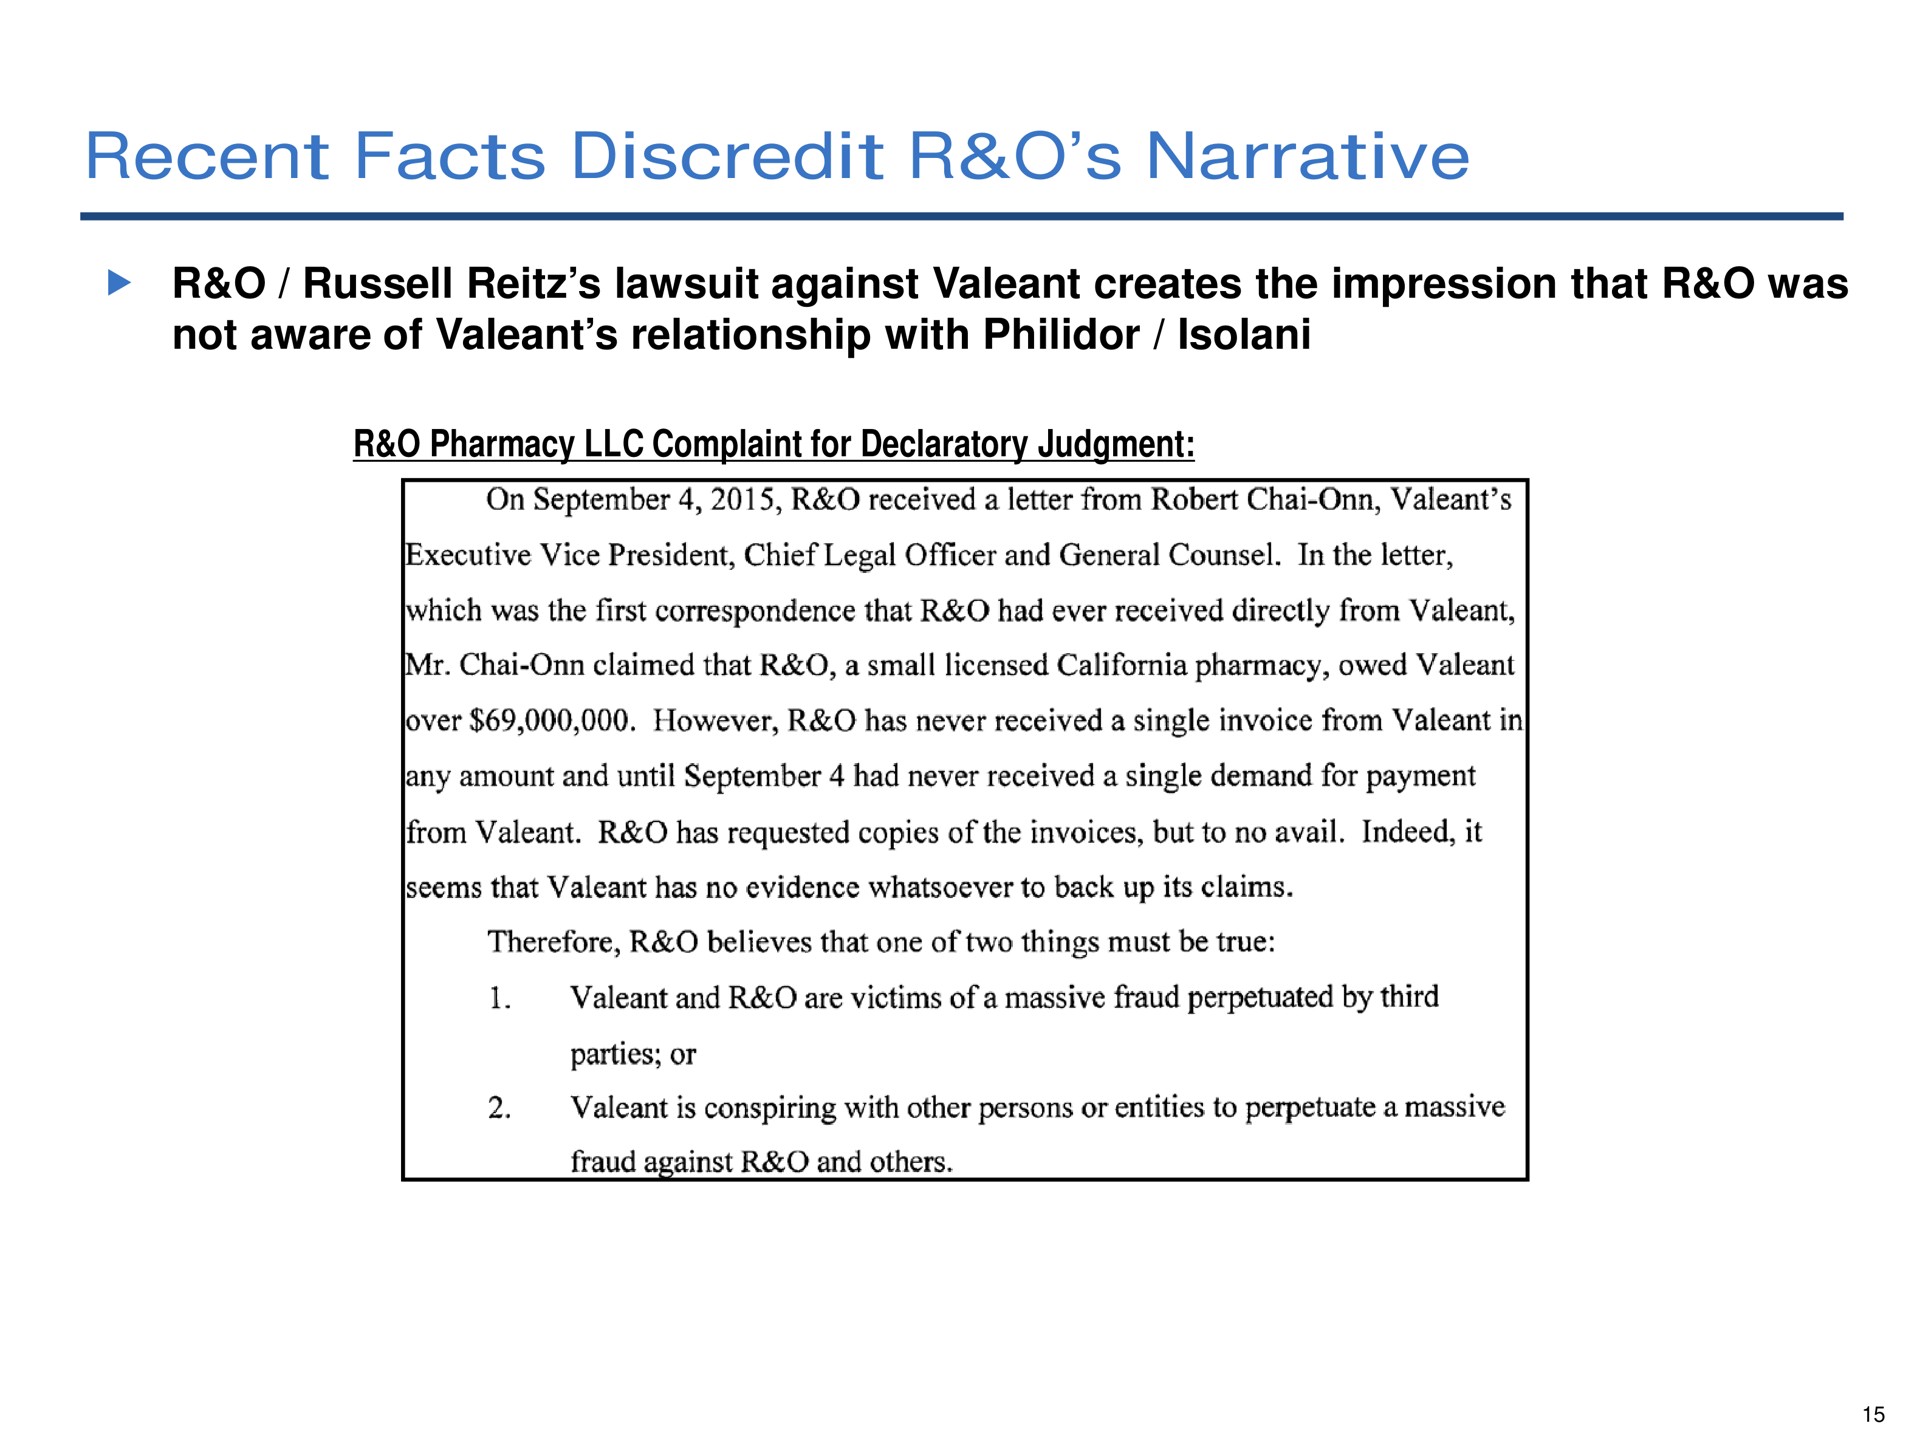 recent facts discredit narrative | Pershing Square